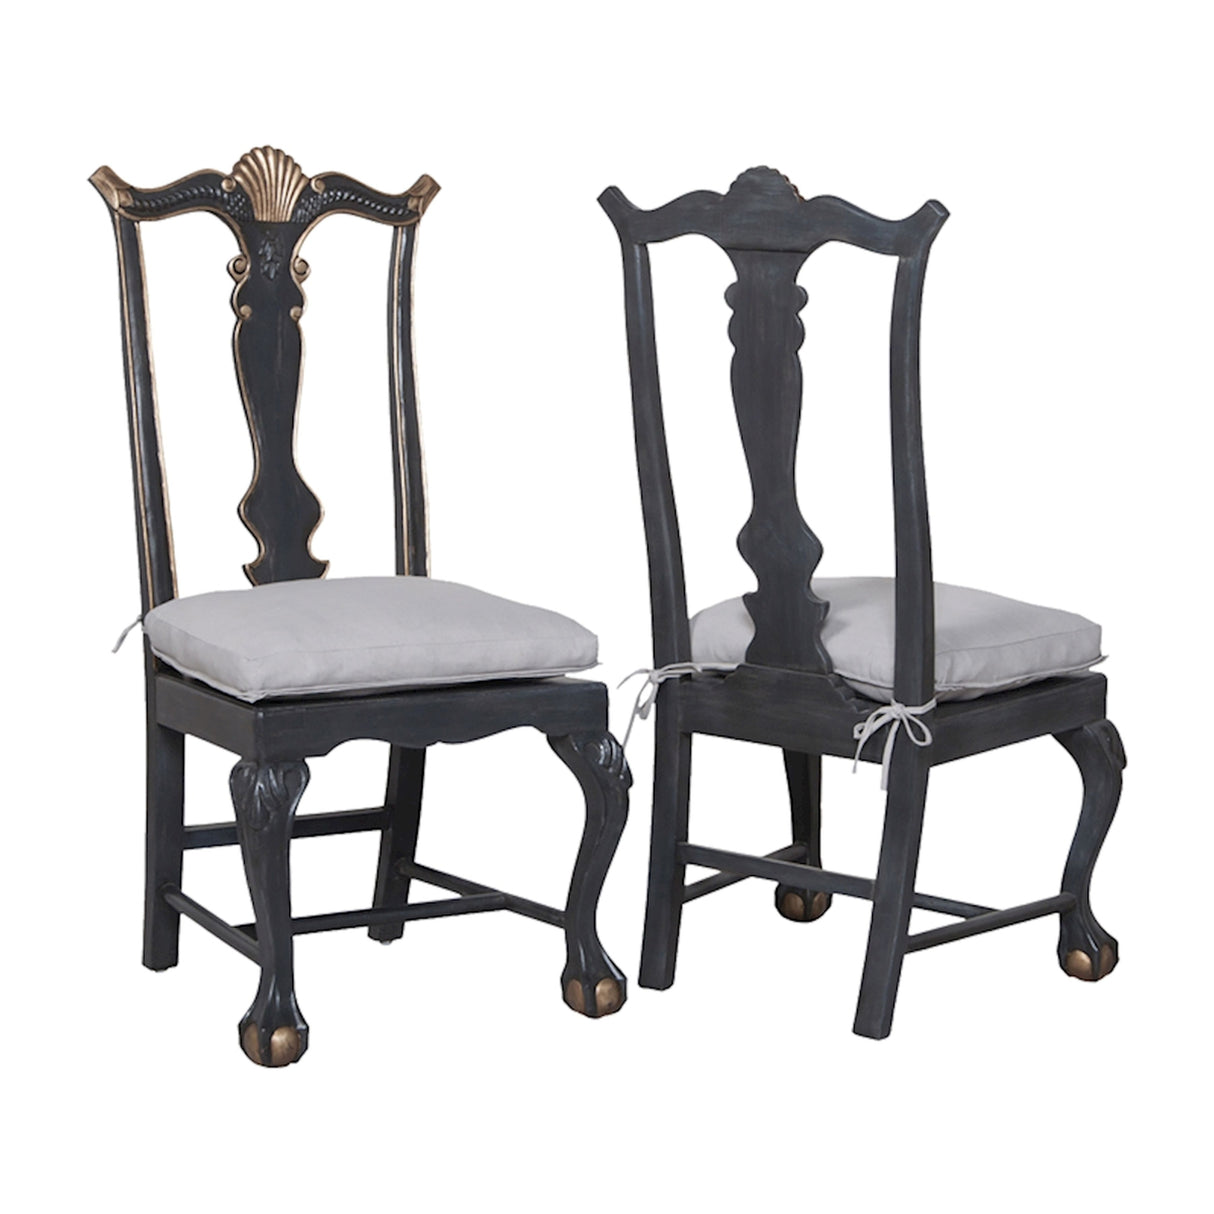 Elk 693007P-1 Chipendale Chairs